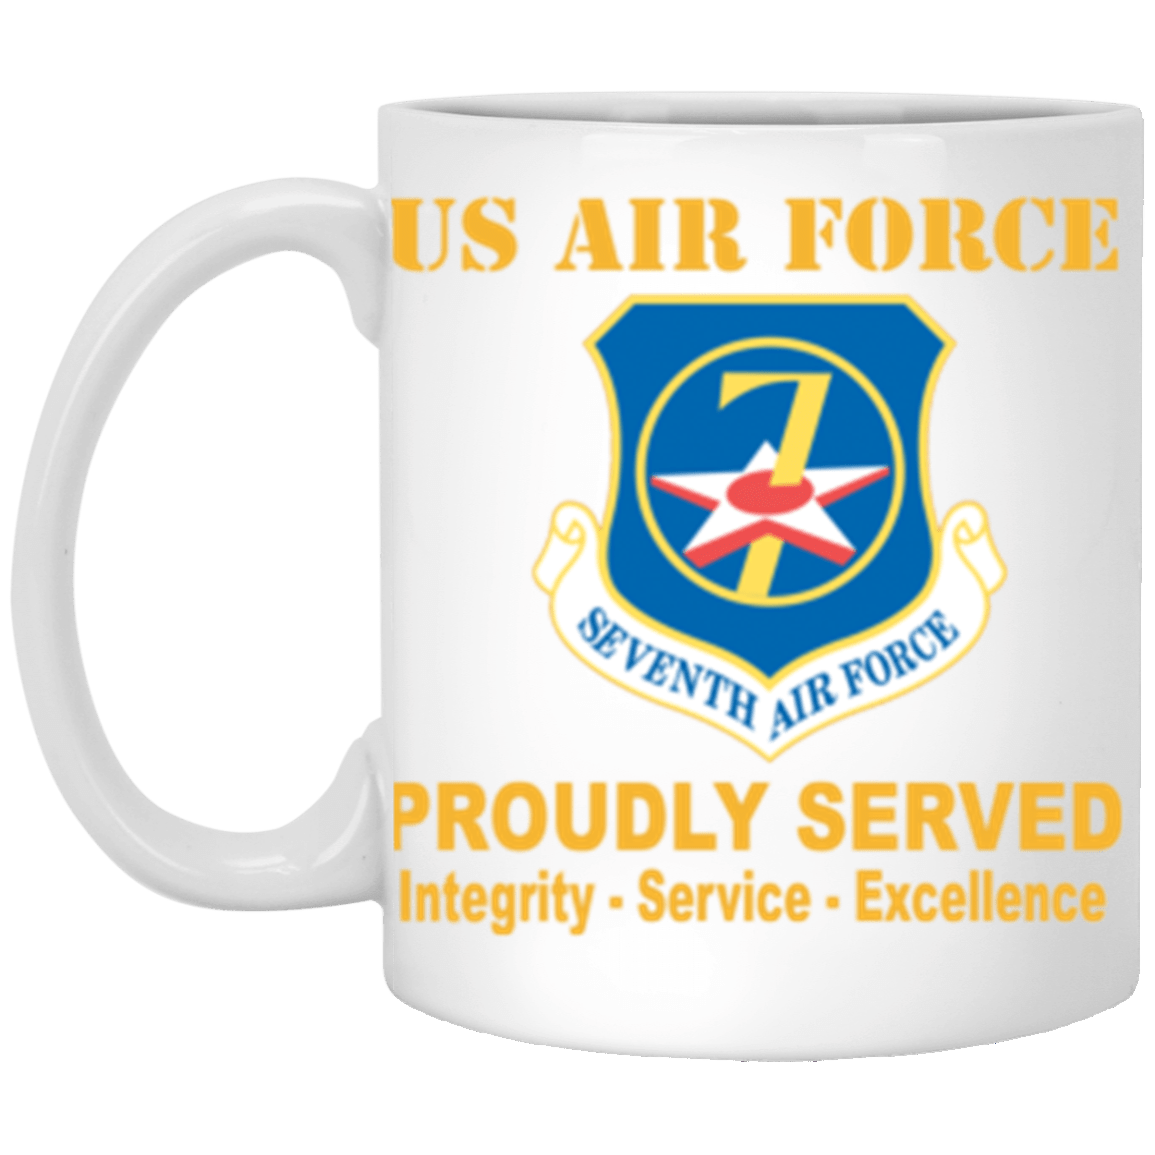 US Air Force Seventh Air Force Proudly Served Core Values 11 oz. White Mug-Drinkware-Veterans Nation